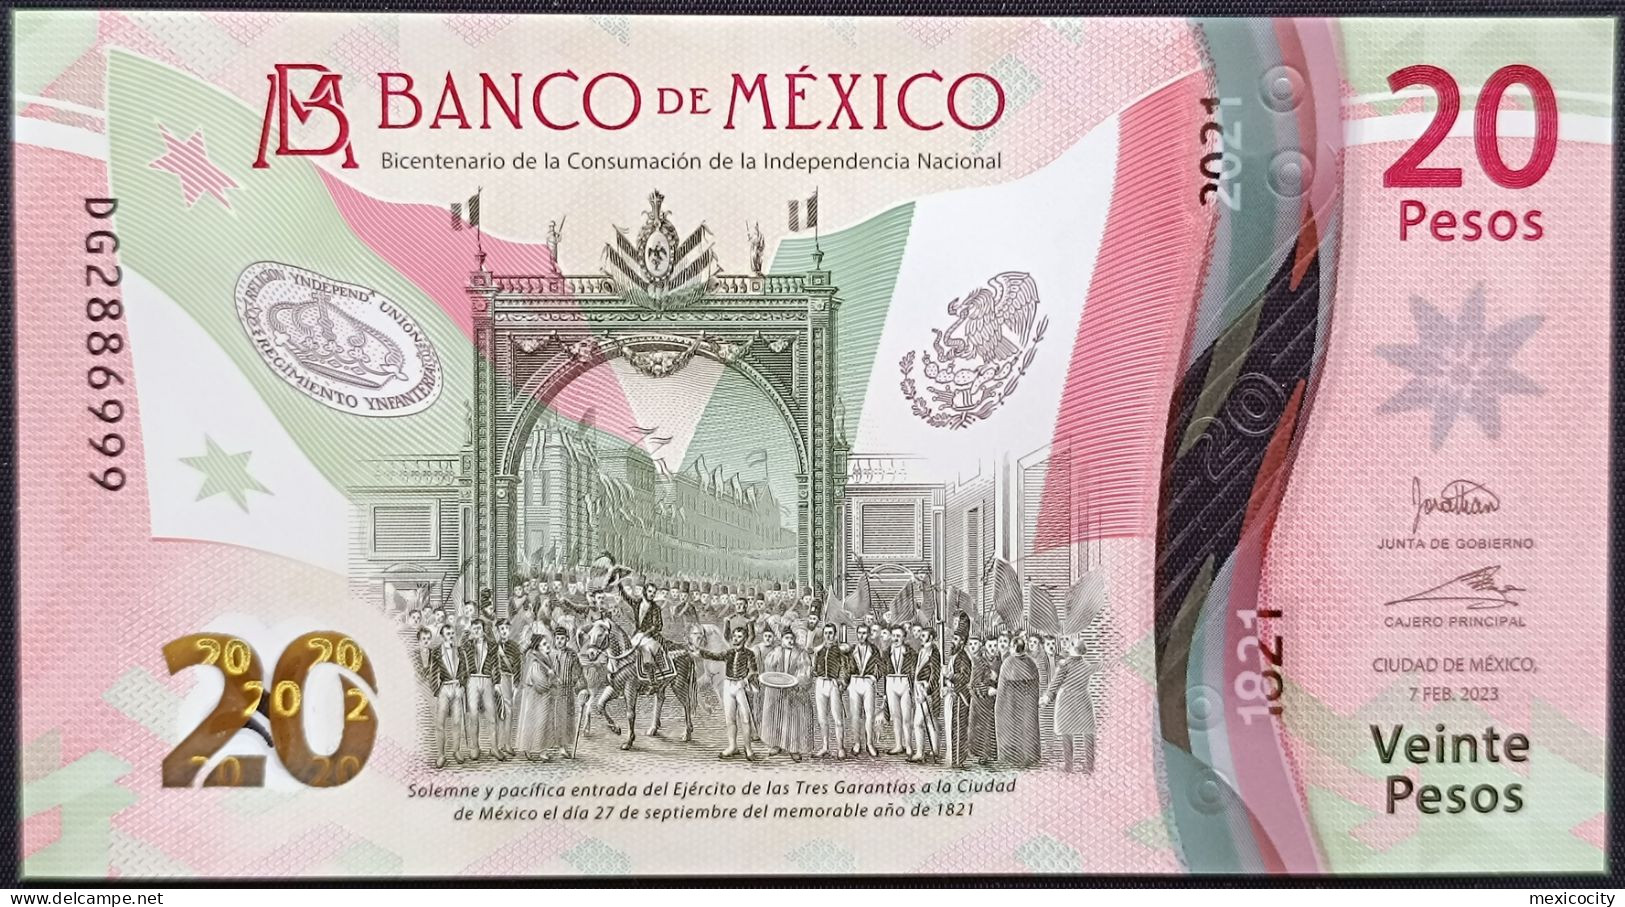 MEXICO $20 SERIES DG2886999 ANGEL # - 7-FEBR-2023 INDEPENDENCE POLYMER NOTE BU Mint Crisp - Messico